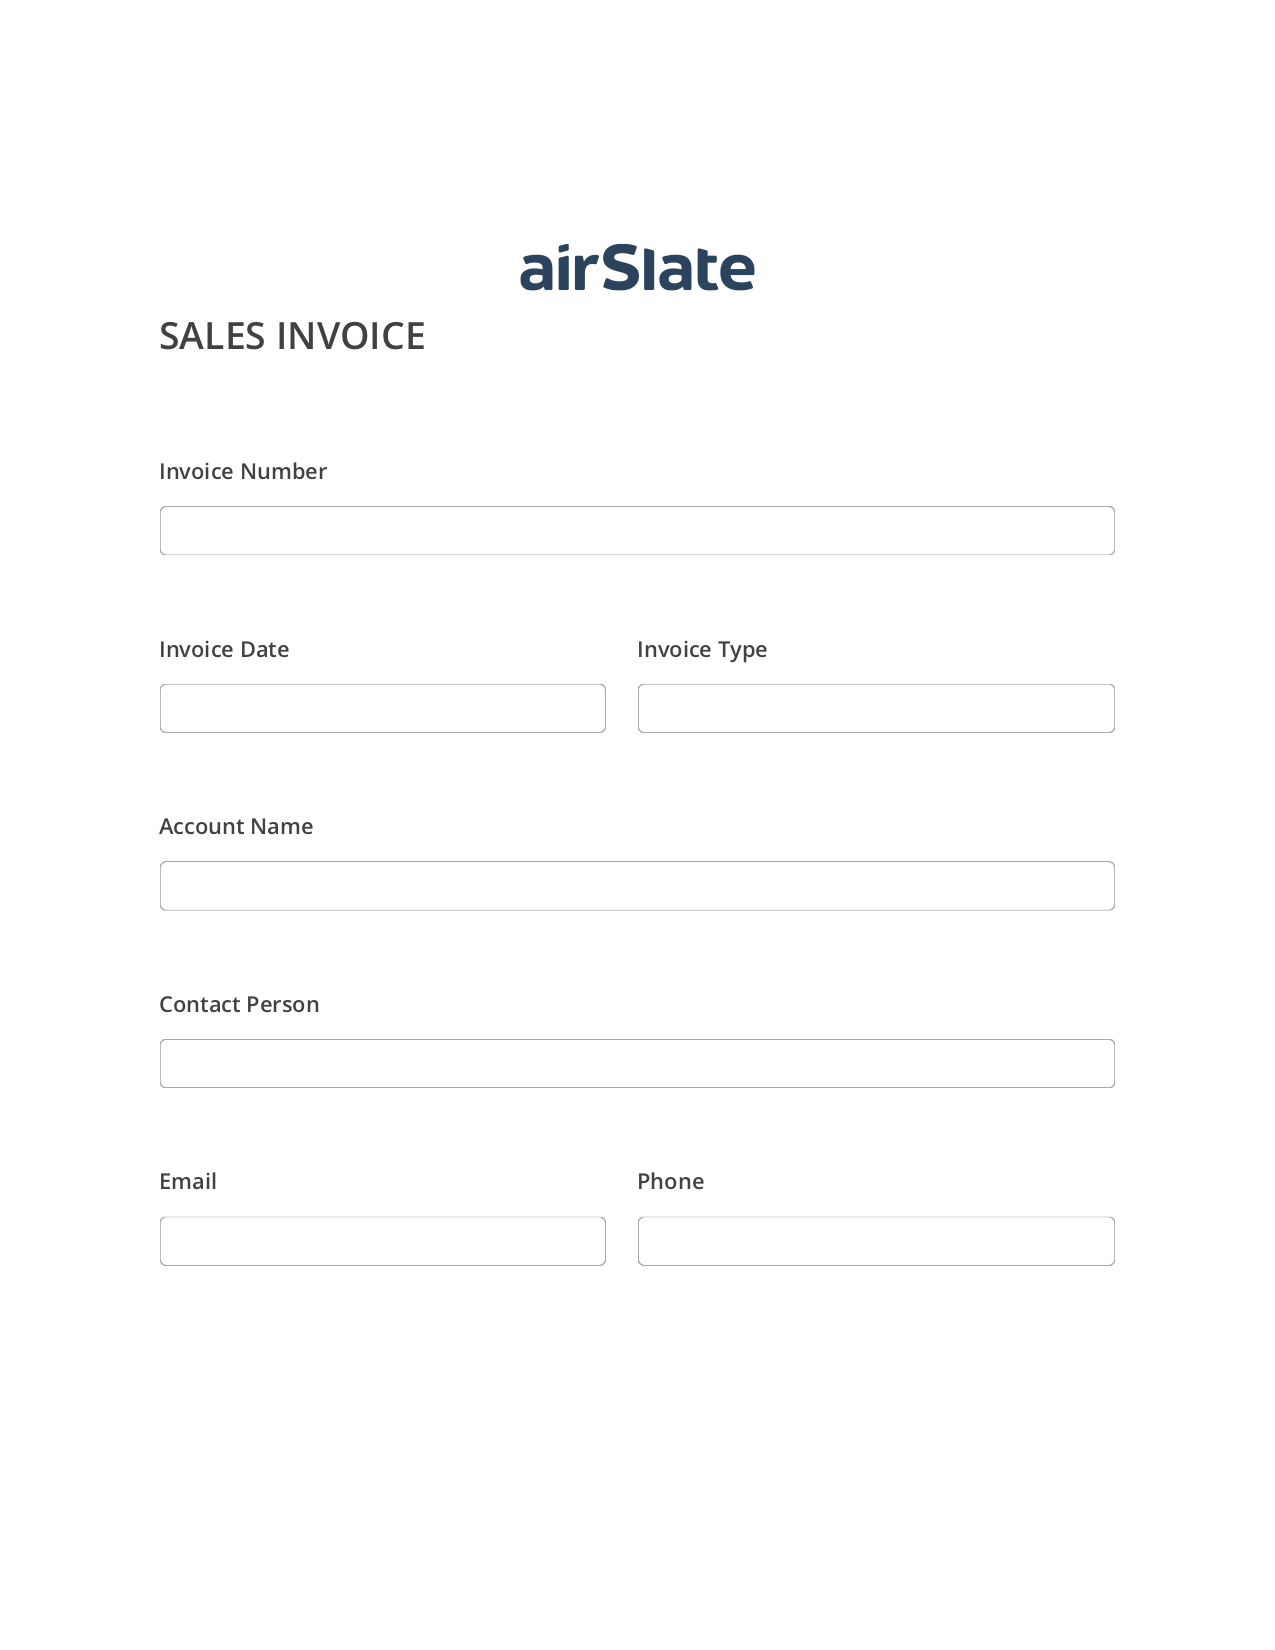 Sales Invoice Workflow Pre-fill from another Slate Bot, Create Slate Reminder Bot, Export to WebMerge Bot